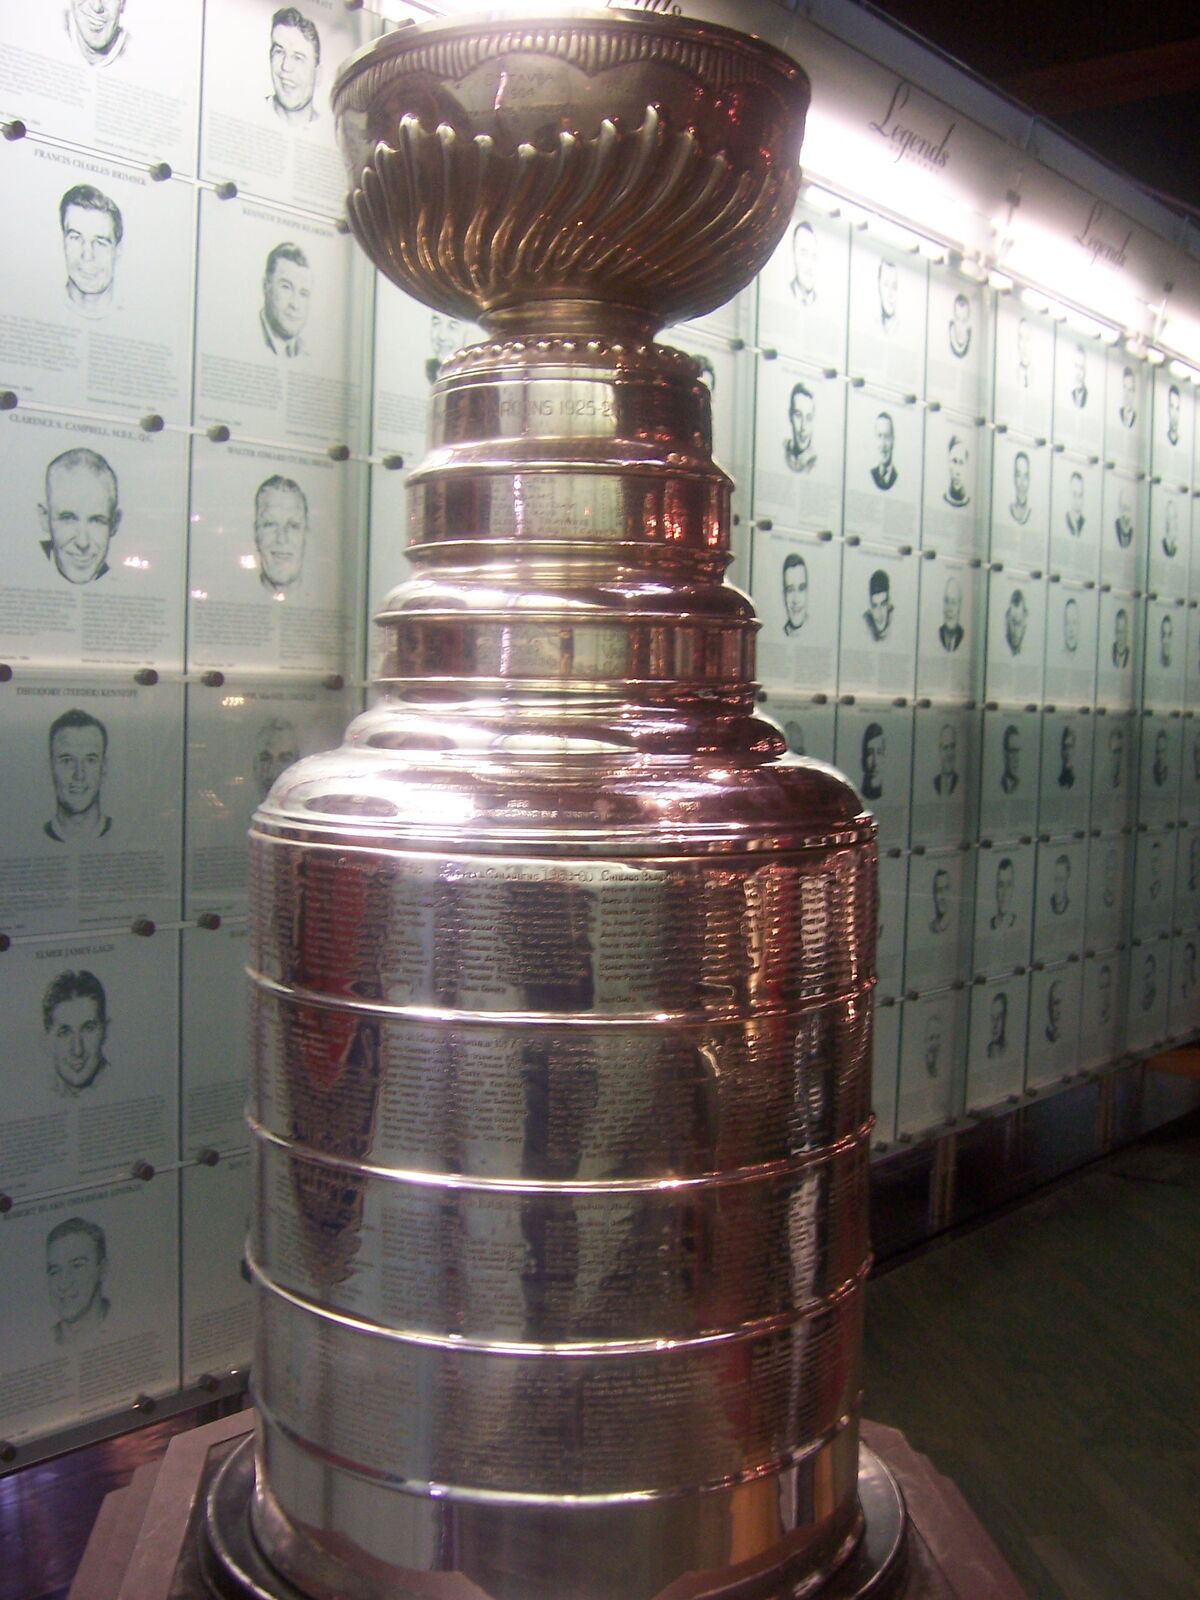 Stanley_Cup